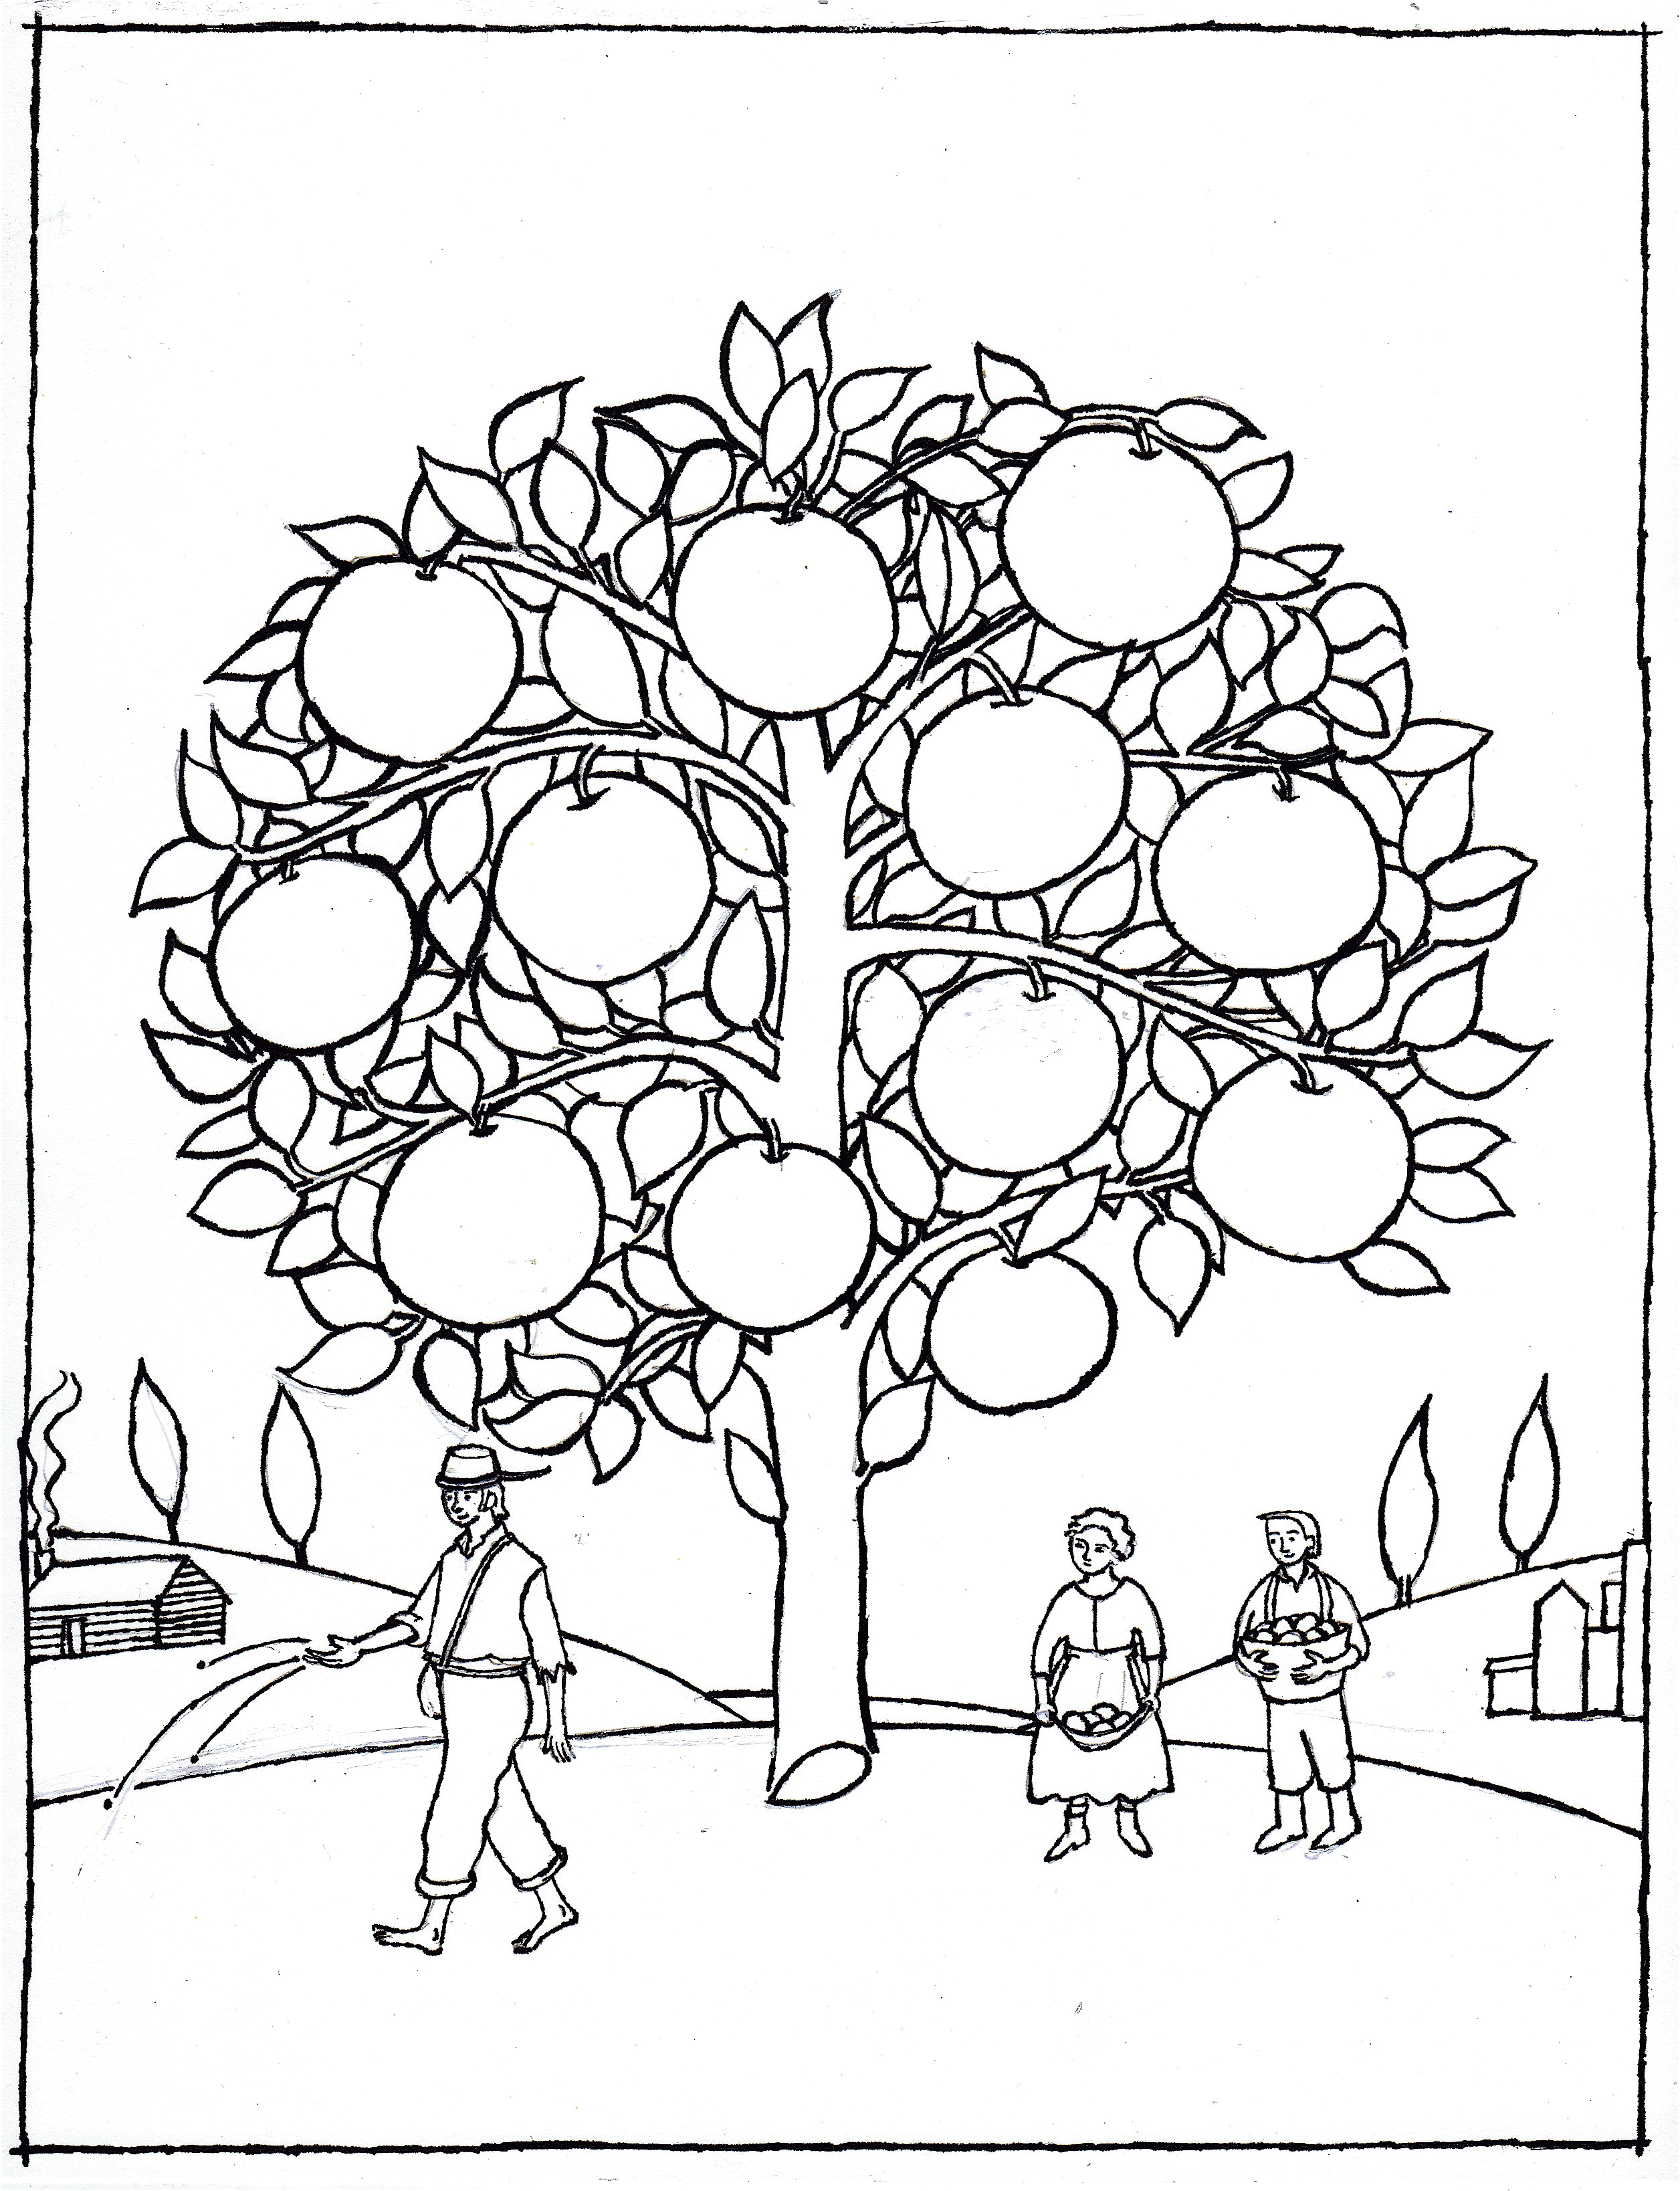 Intellect Free Johnny Appleseed Coloring Pages Az Coloring Pages ...